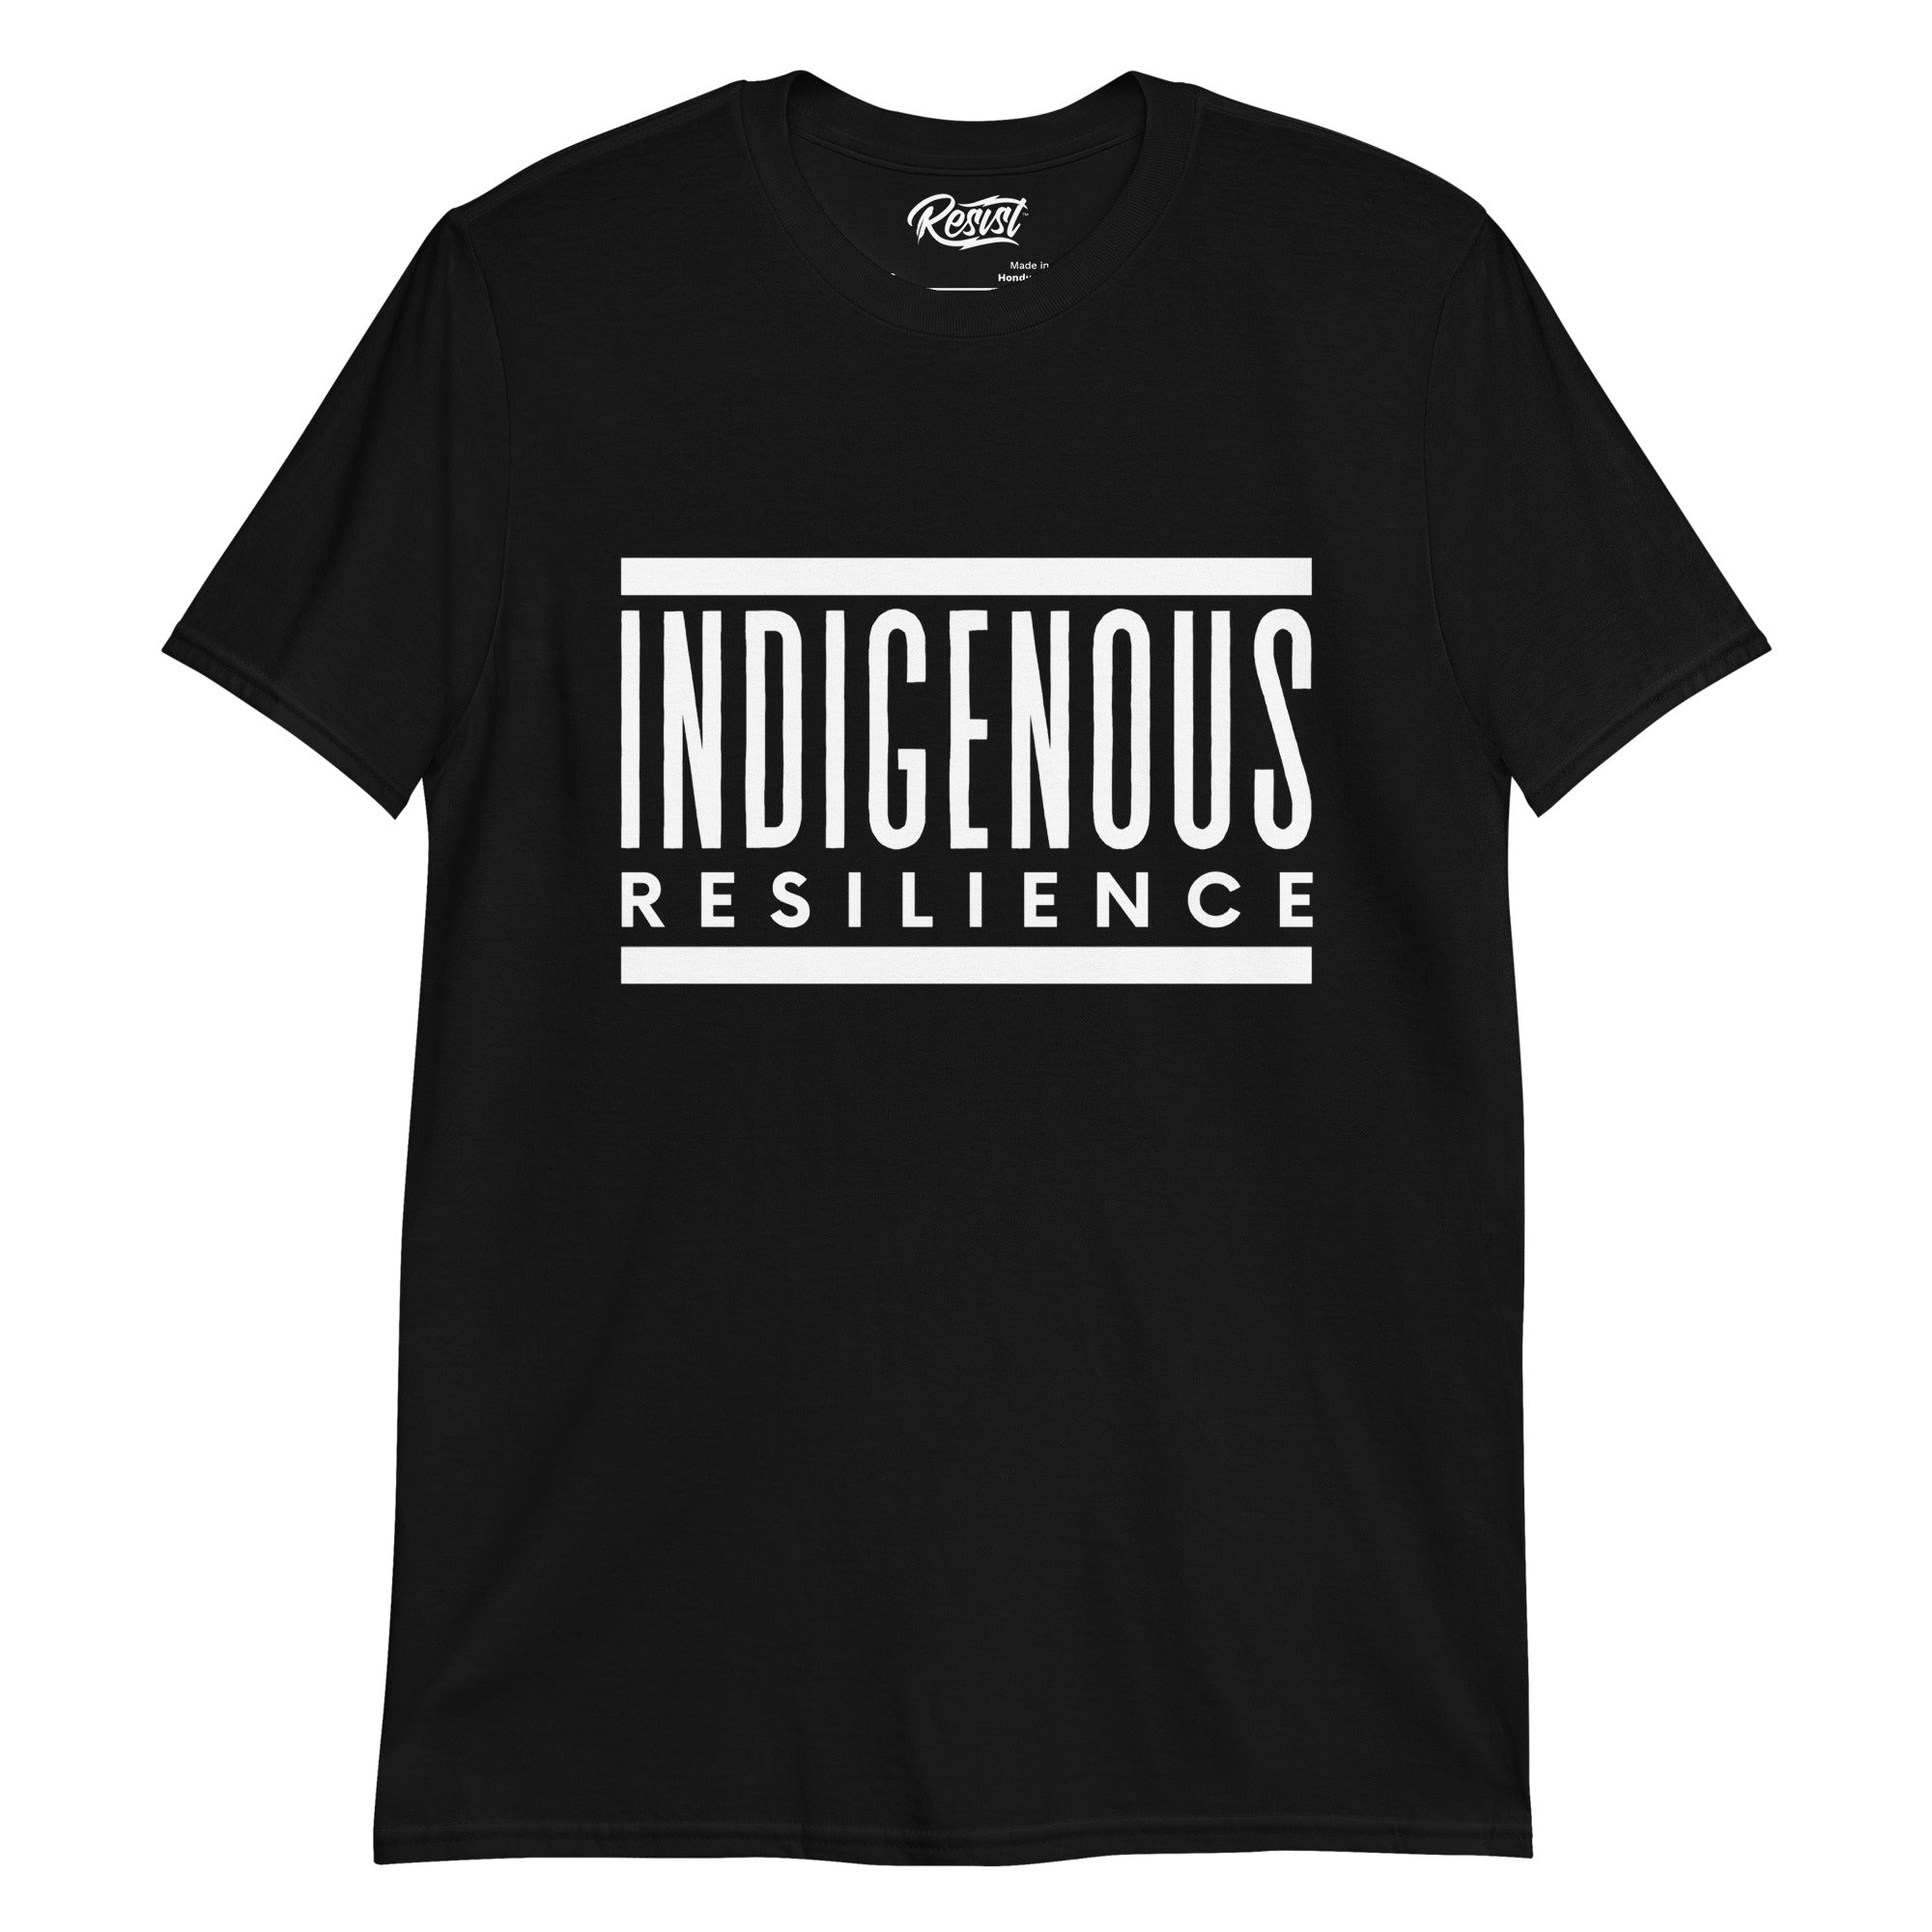 INDIGENOUS RESILIENCE T-shirt